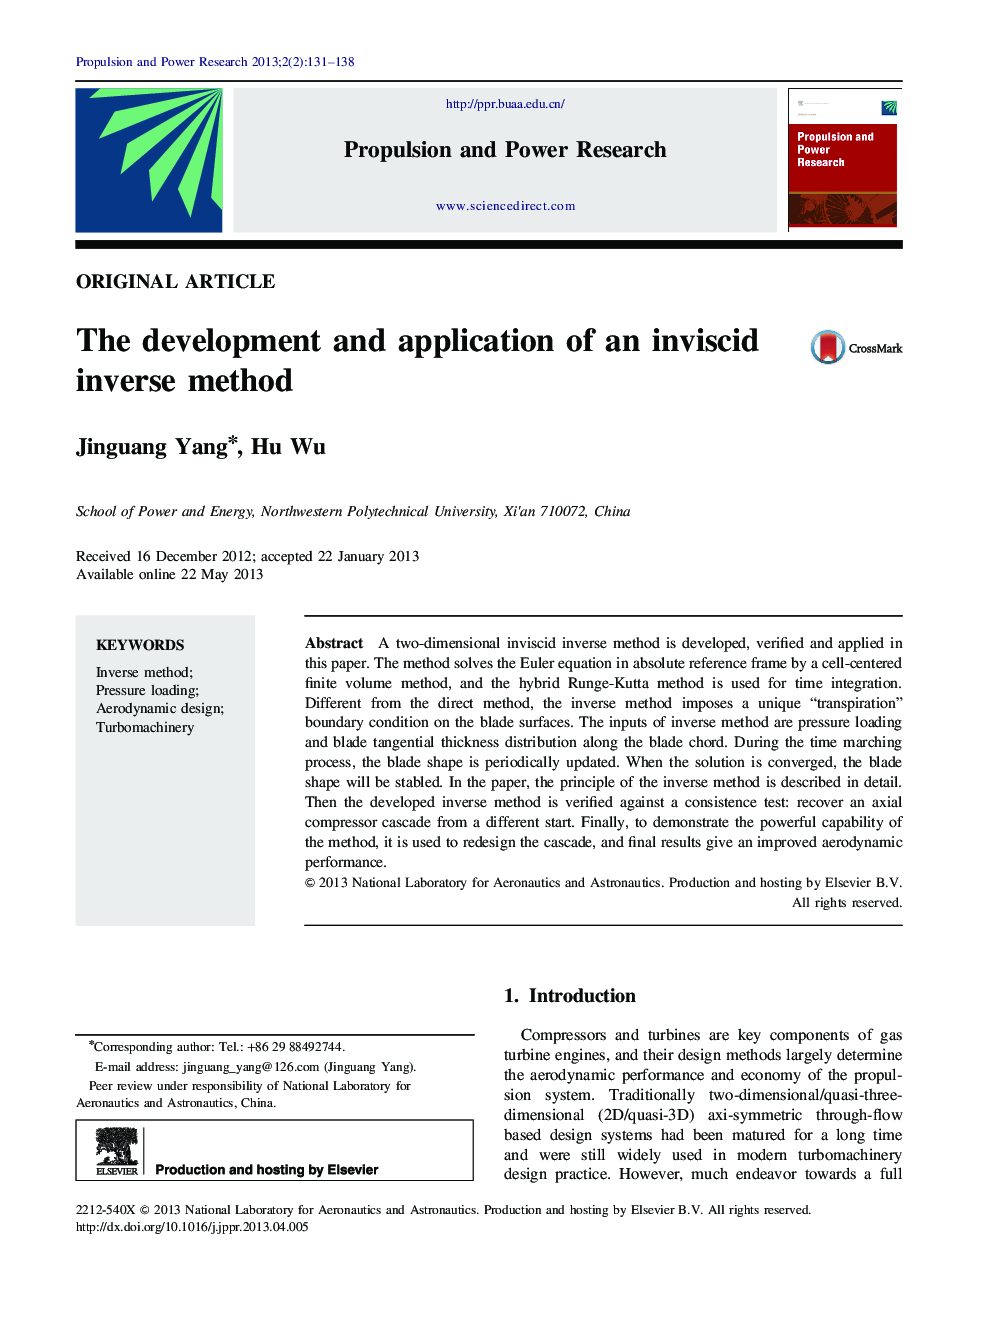 The development and application of an inviscid inverse method 